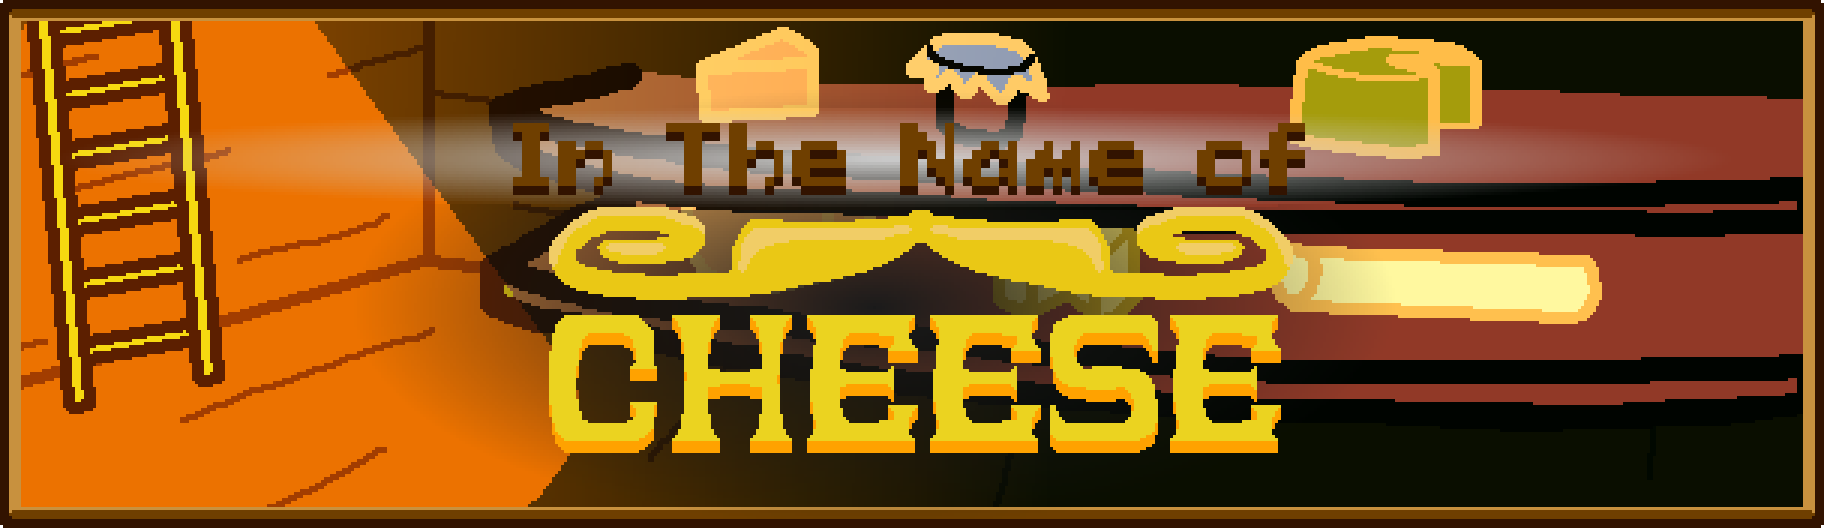 In The Name of Cheese